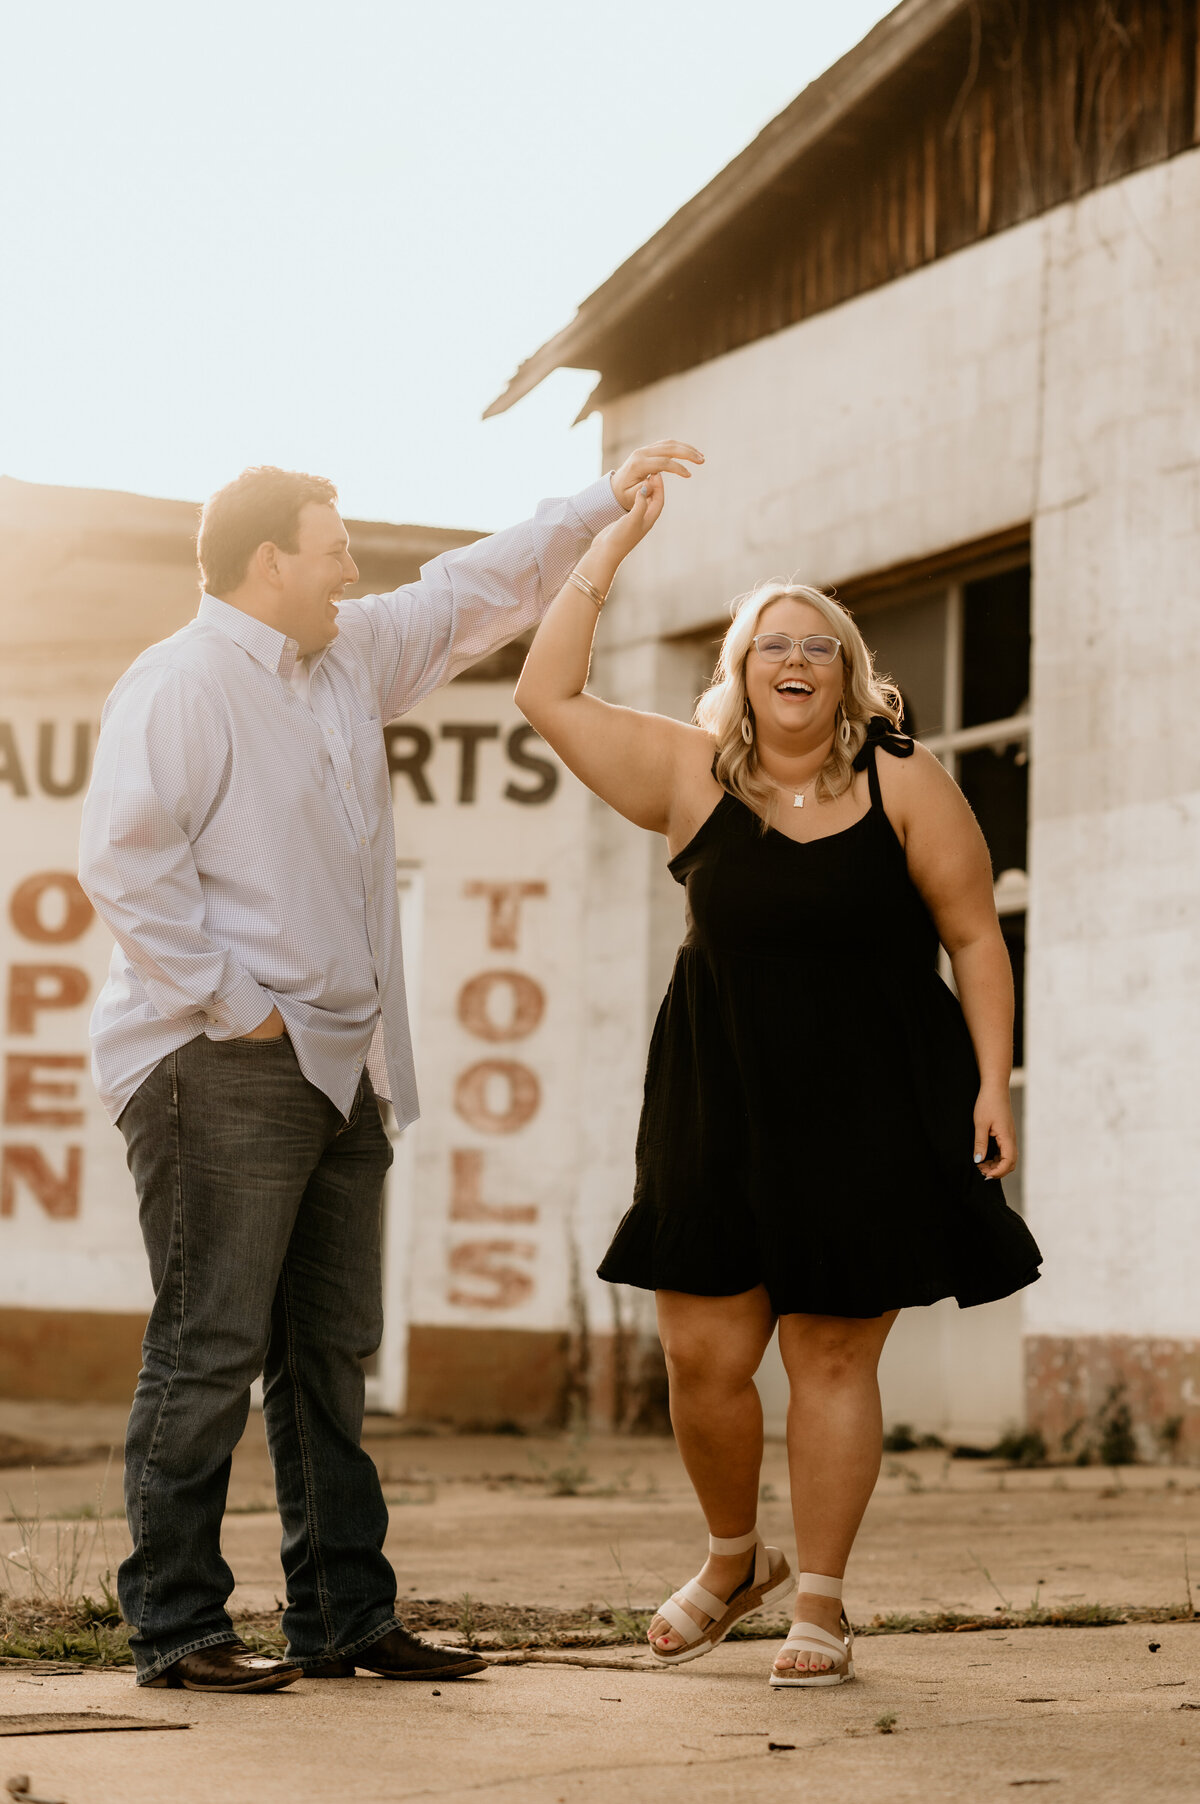 downtown little rock engagement session with man twirling his fiance as they dance on the sidewalk as the sun sets in the distance